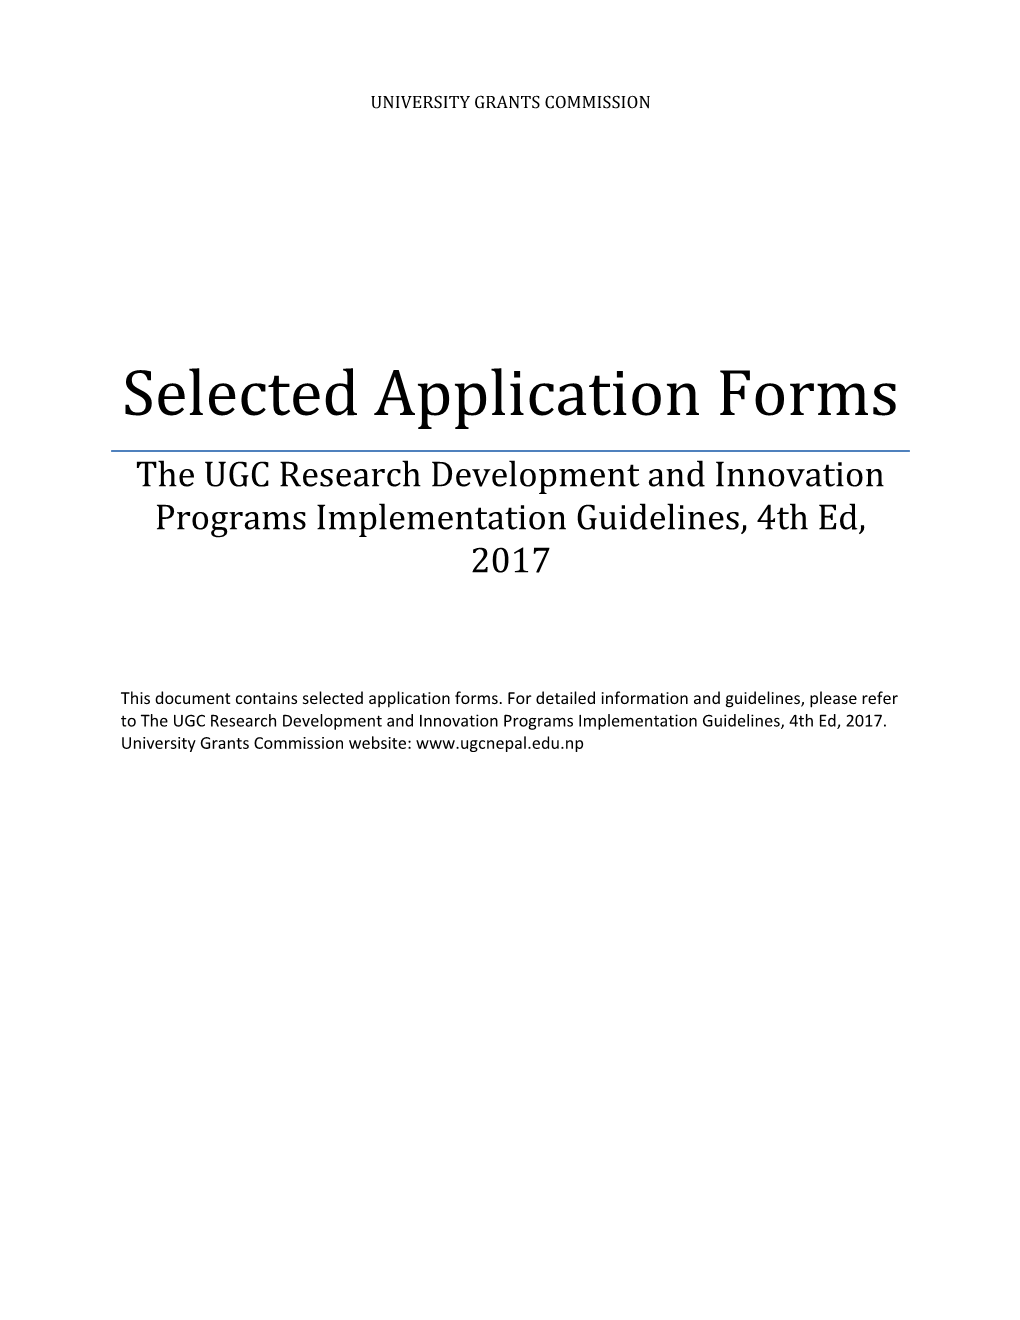 Selected Application Forms